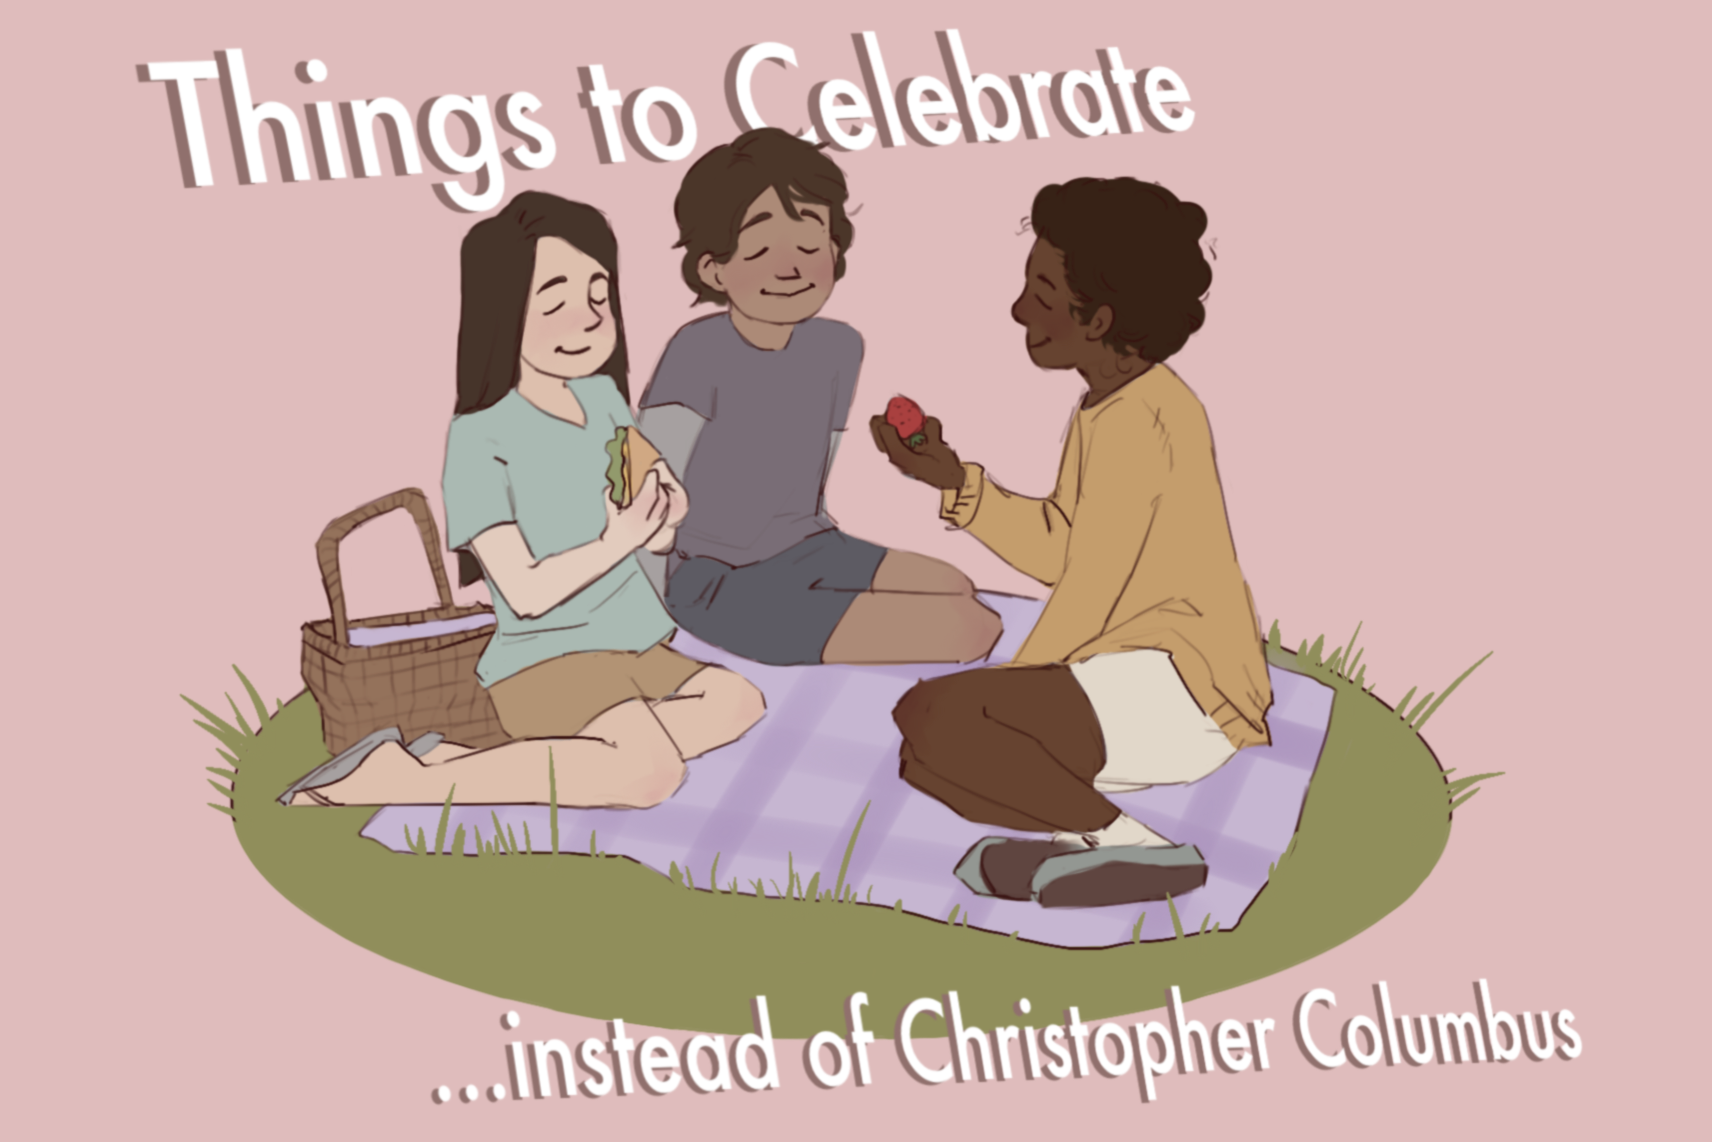 in article about alternatives to Columbus Day, three kids sitting on a picnic blanket